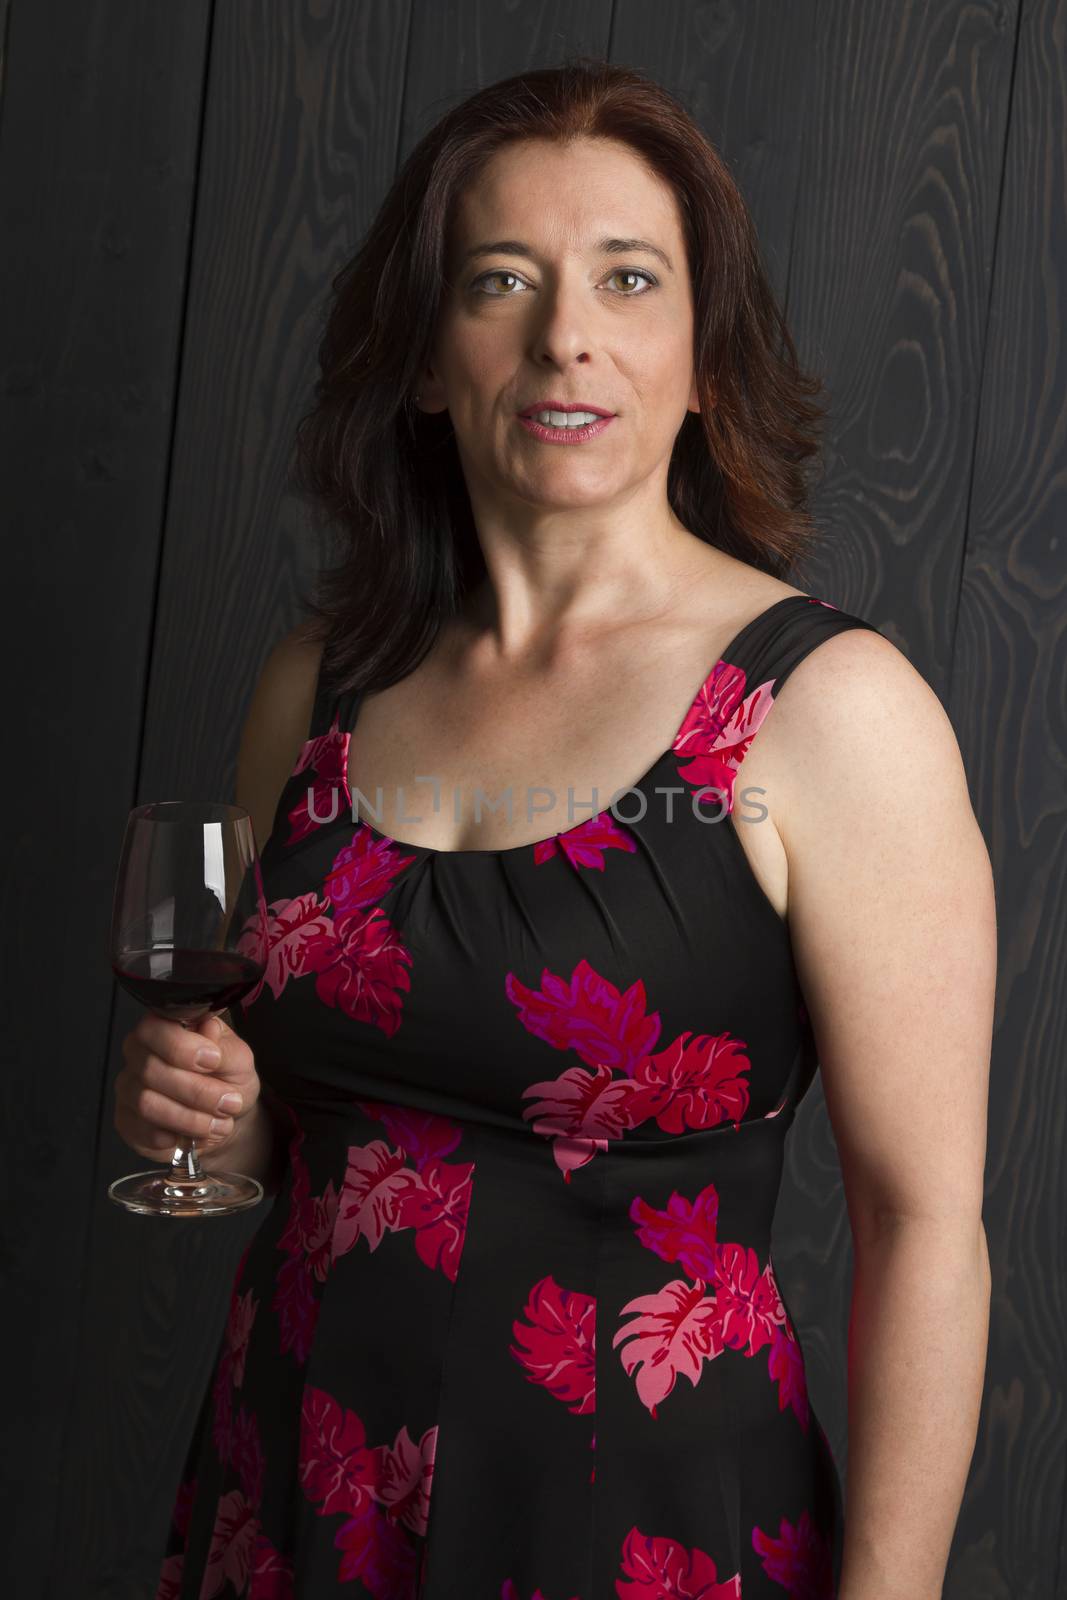 forty year old woman with wine by mypstudio